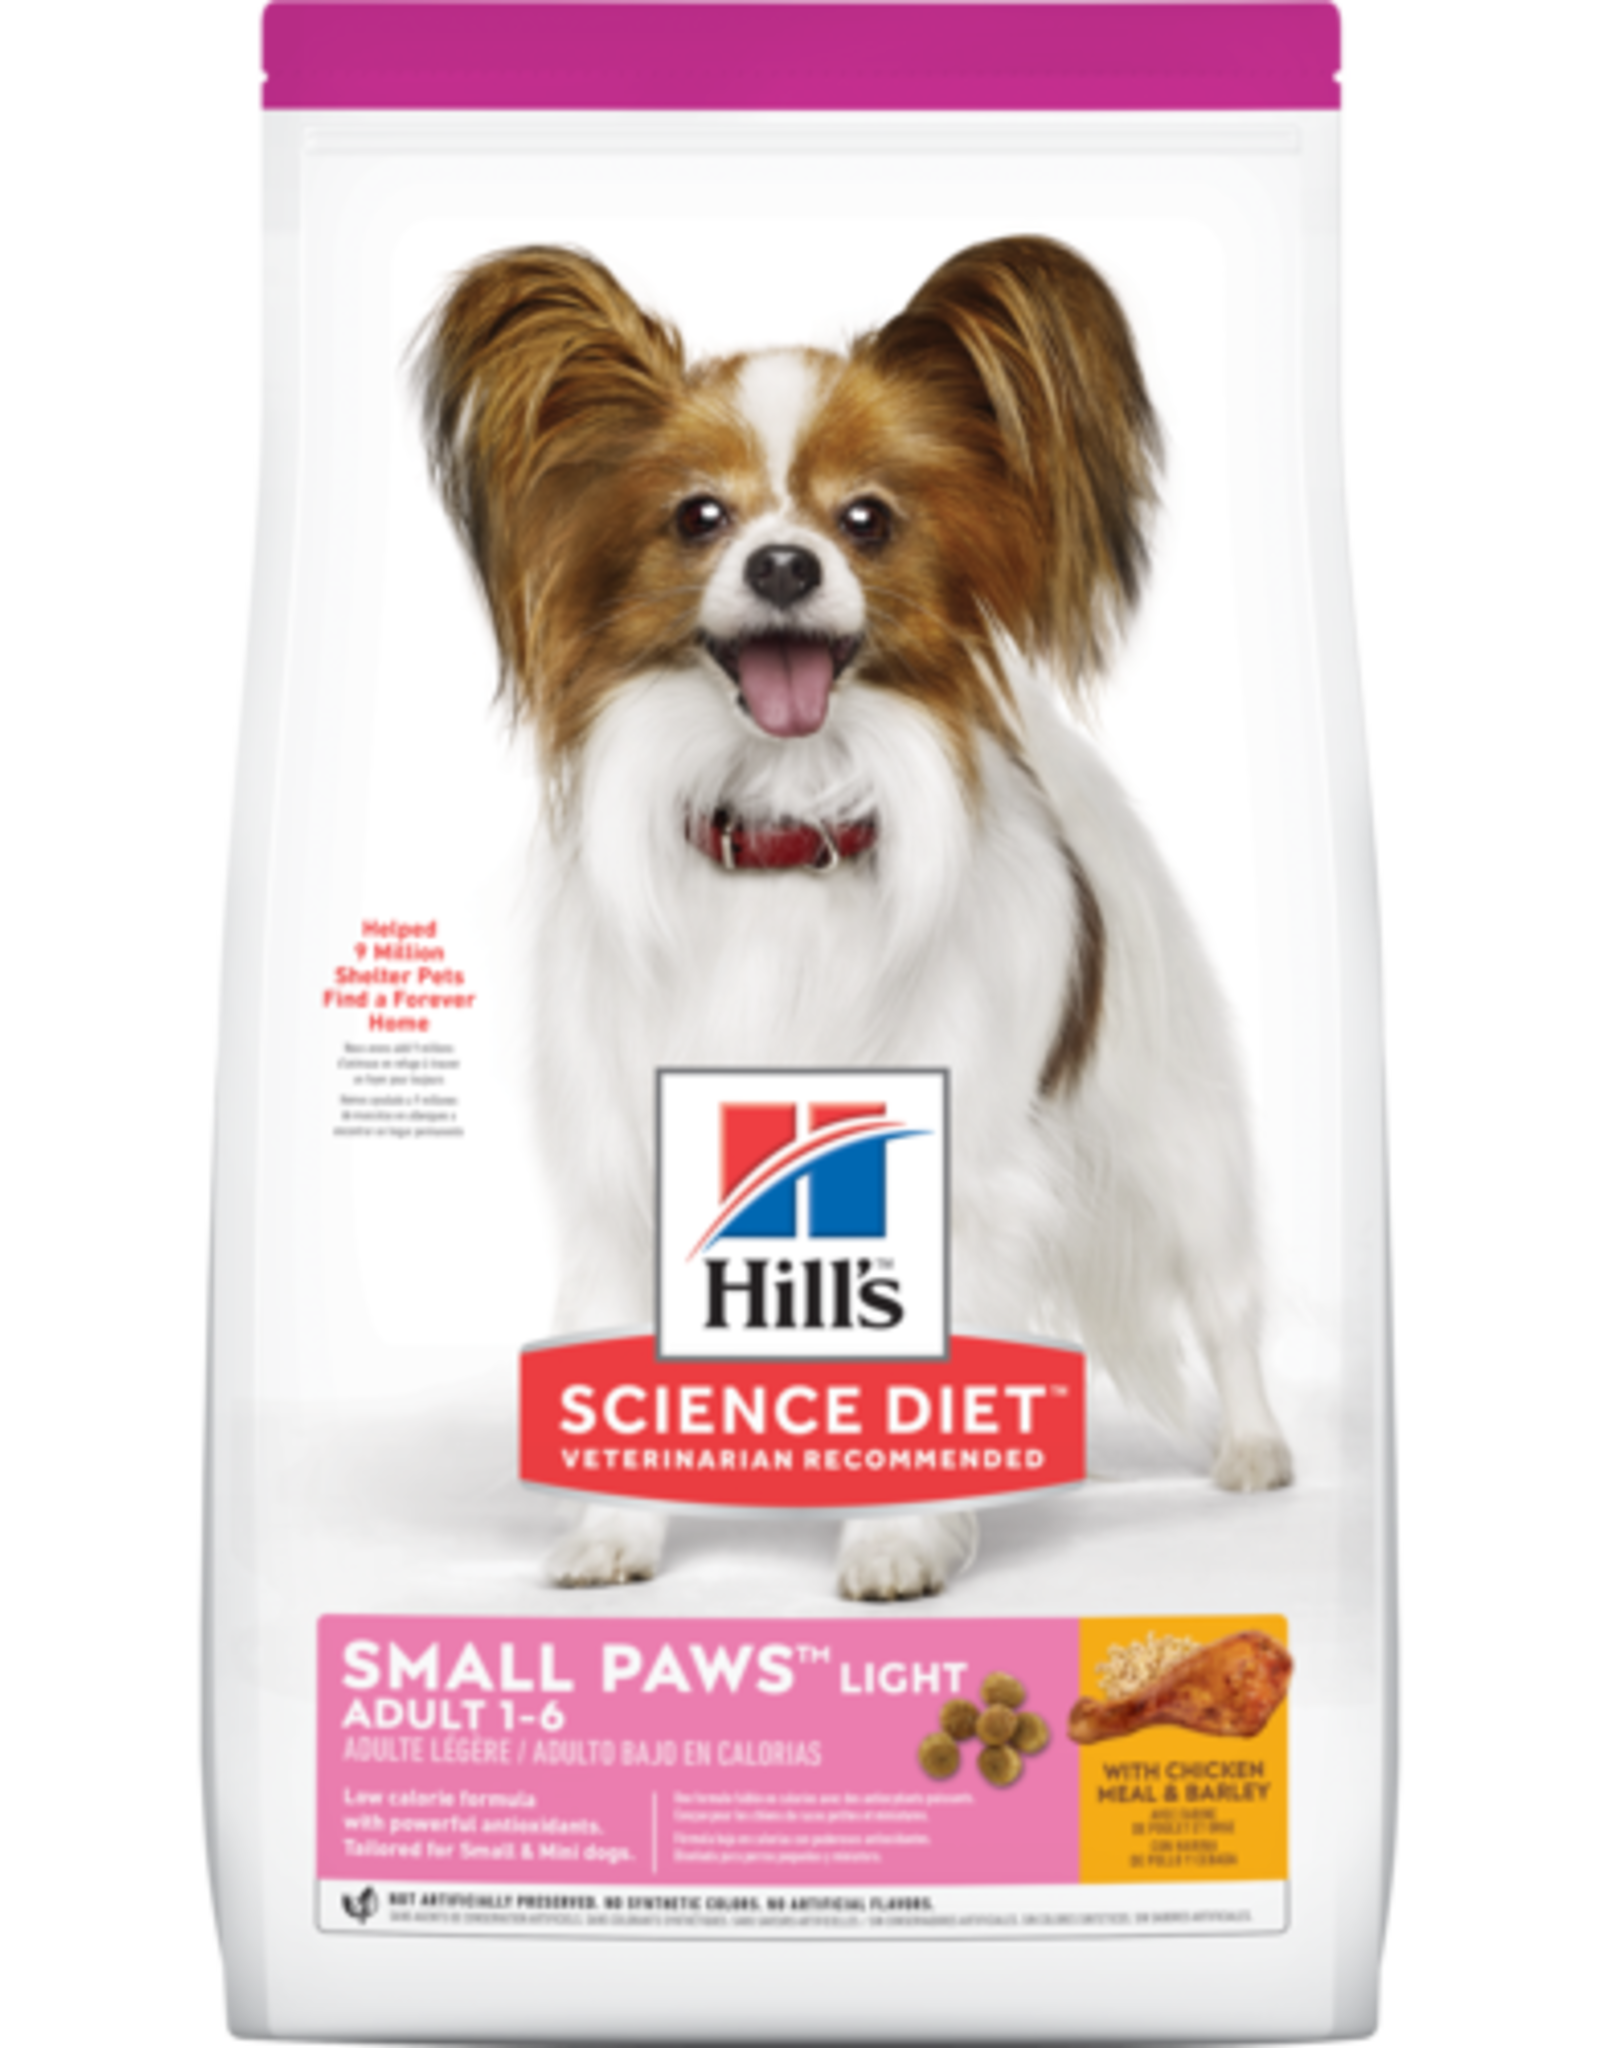 SCIENCE DIET HILL'S SCIENCE DIET CANINE ADULT SMALL PAWS LIGHT 4.5LBS